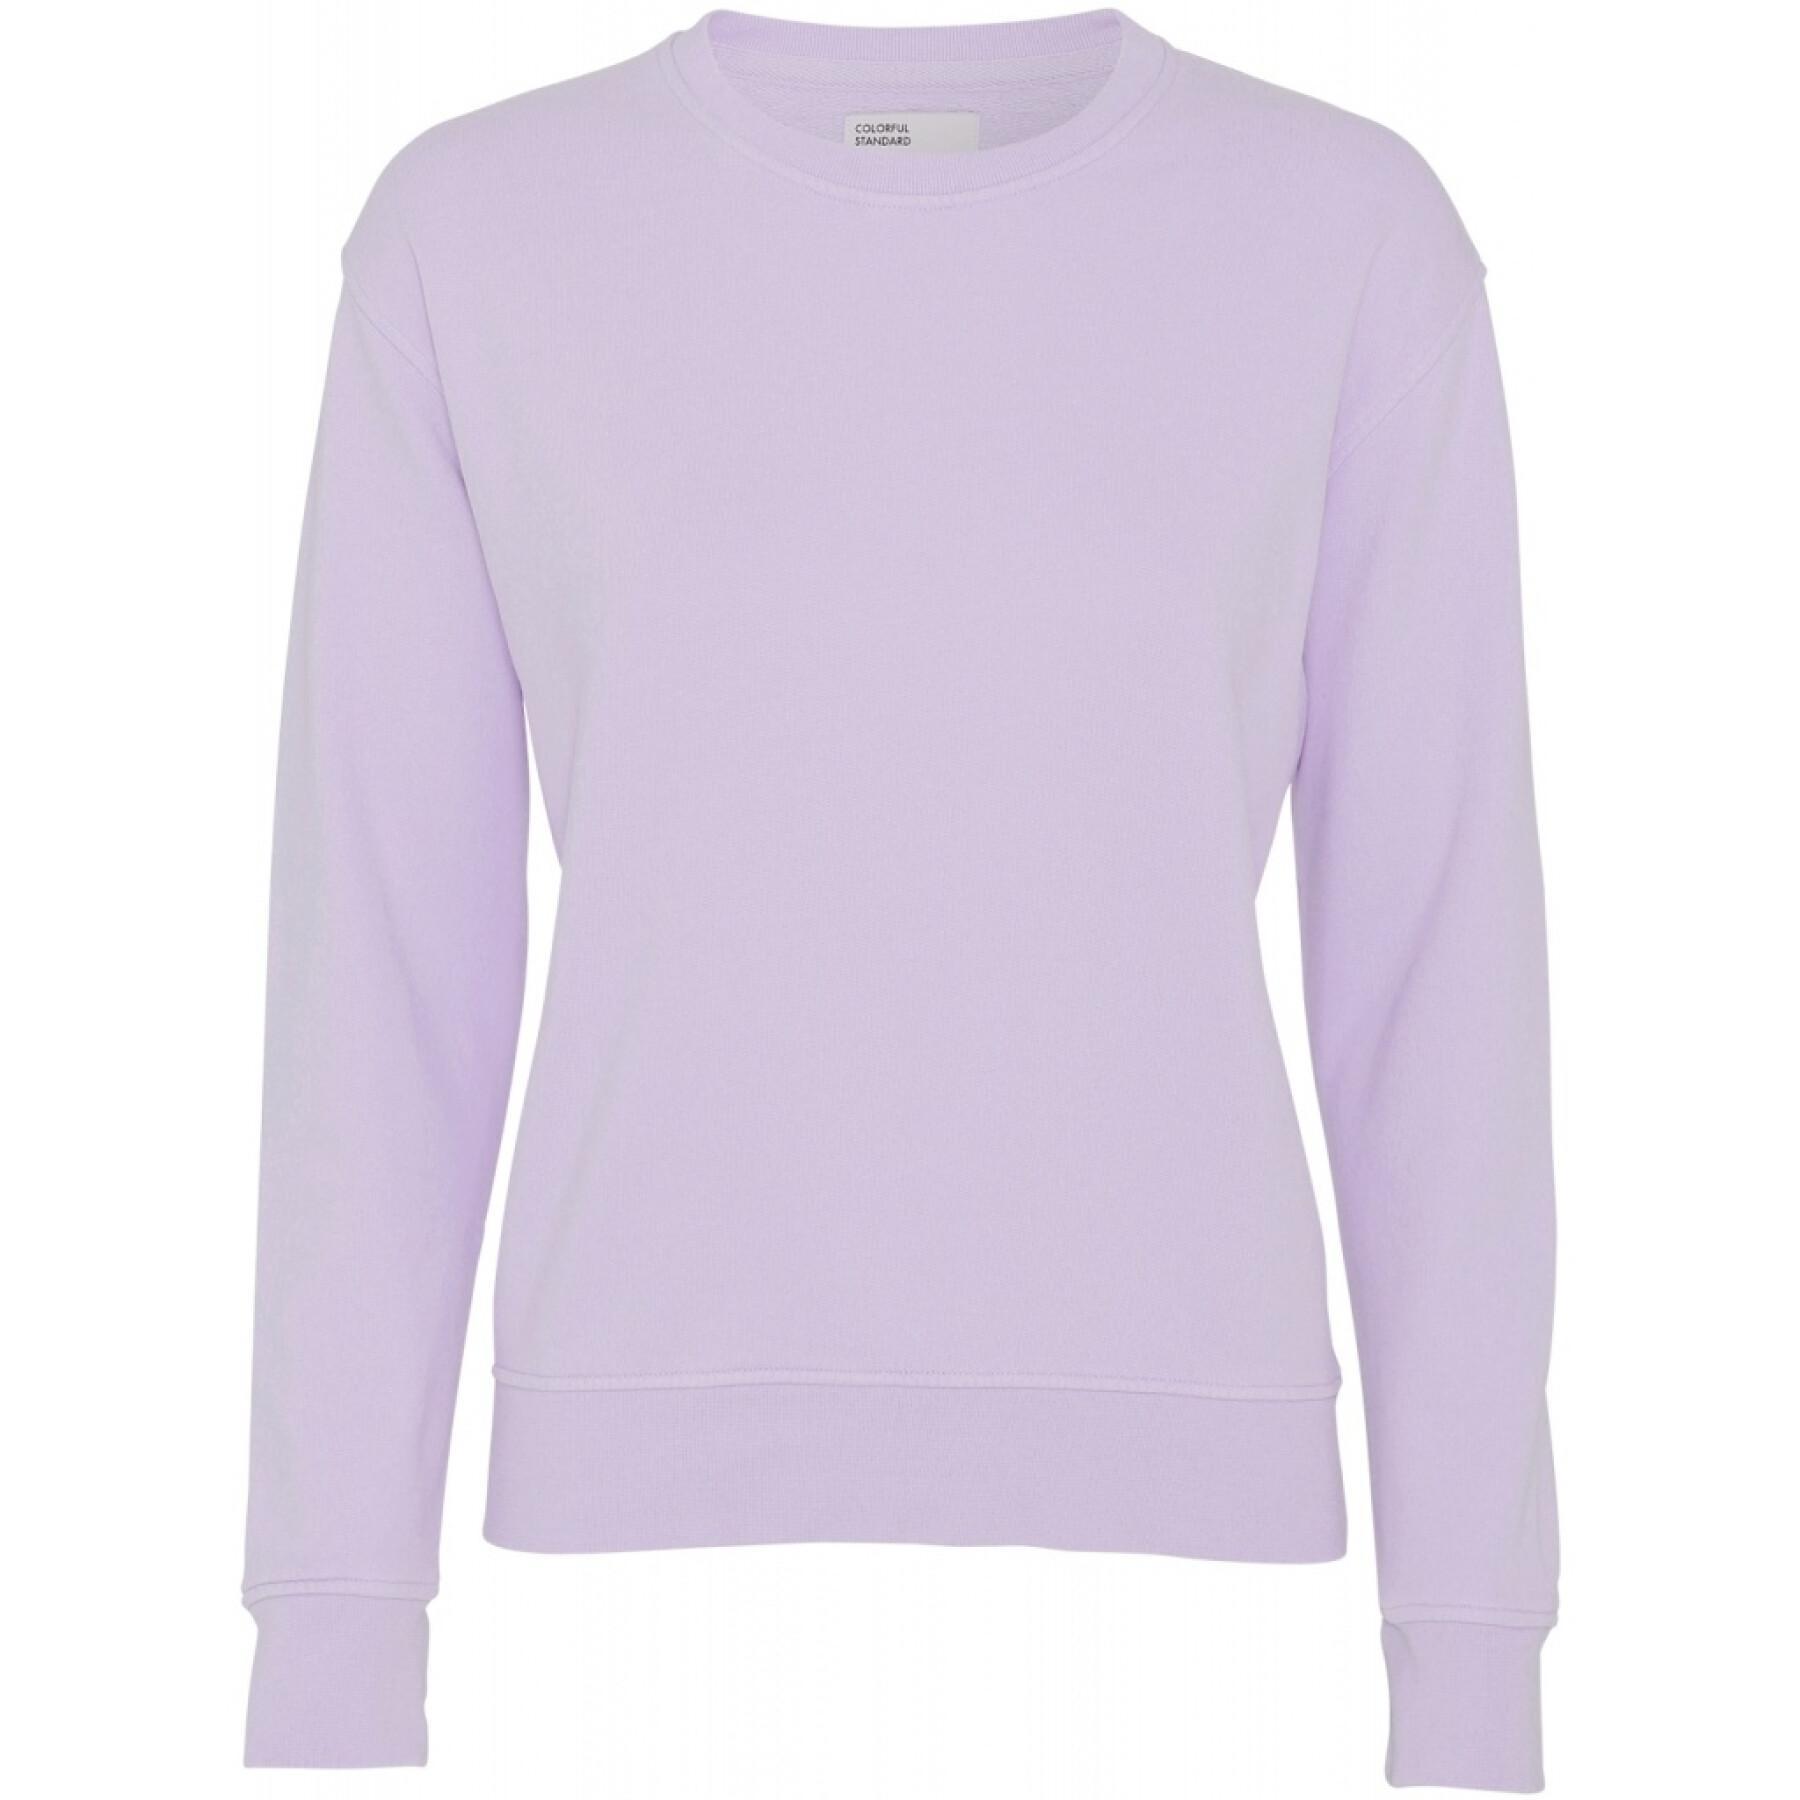 Women's round neck sweater Colorful Standard Classic Organic soft lavender